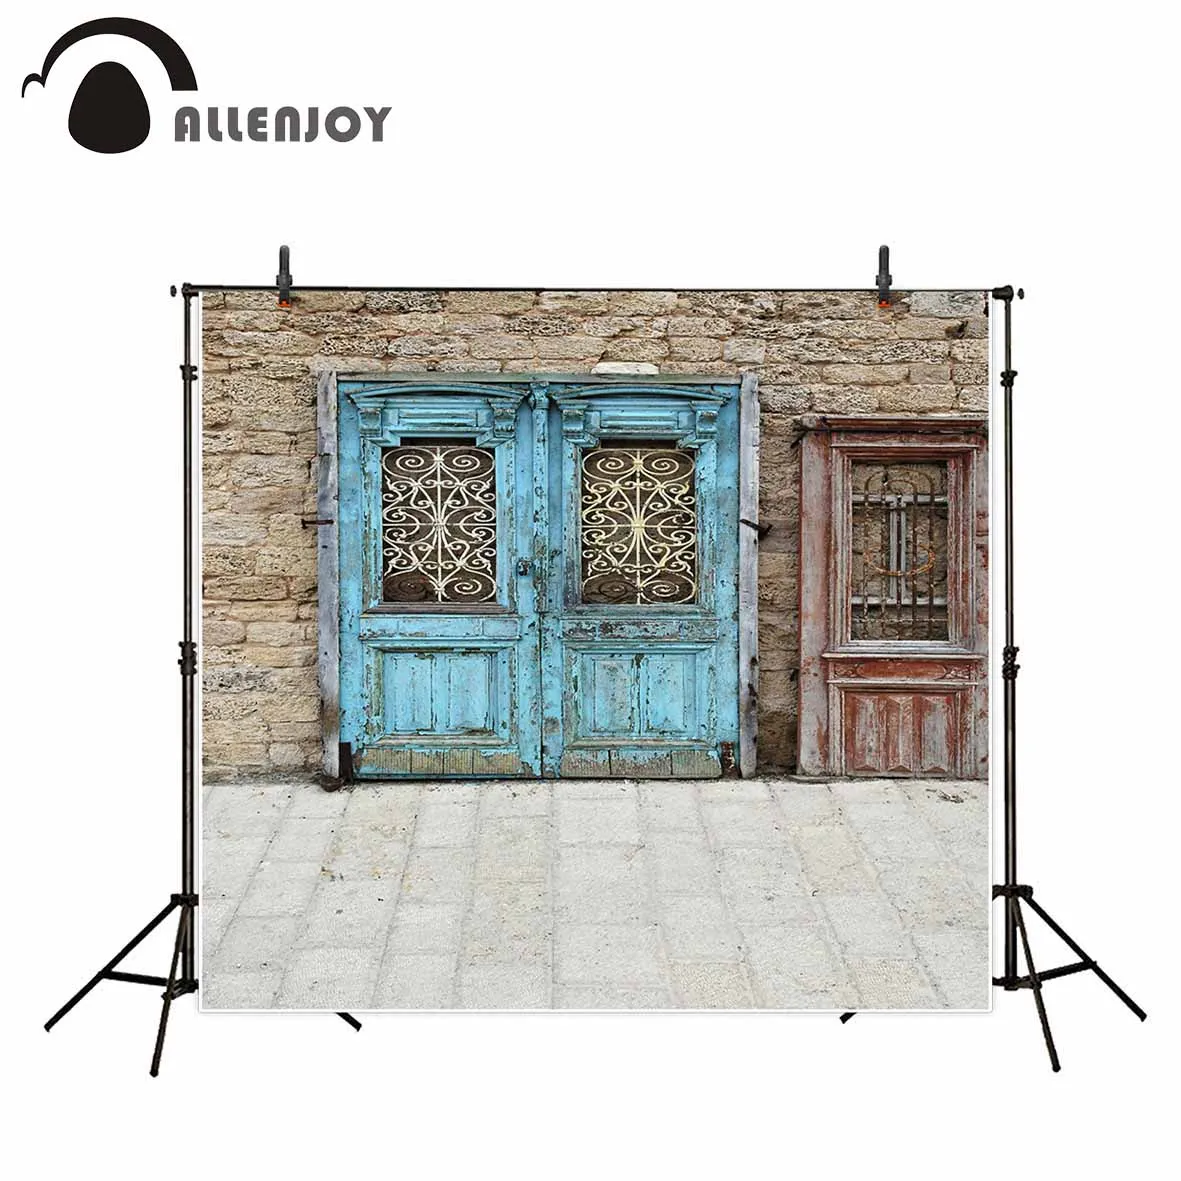 Allenjoy background for photo vintage wood door brick wall Islam backdrop photobooth for a photo shoot photo studio printed